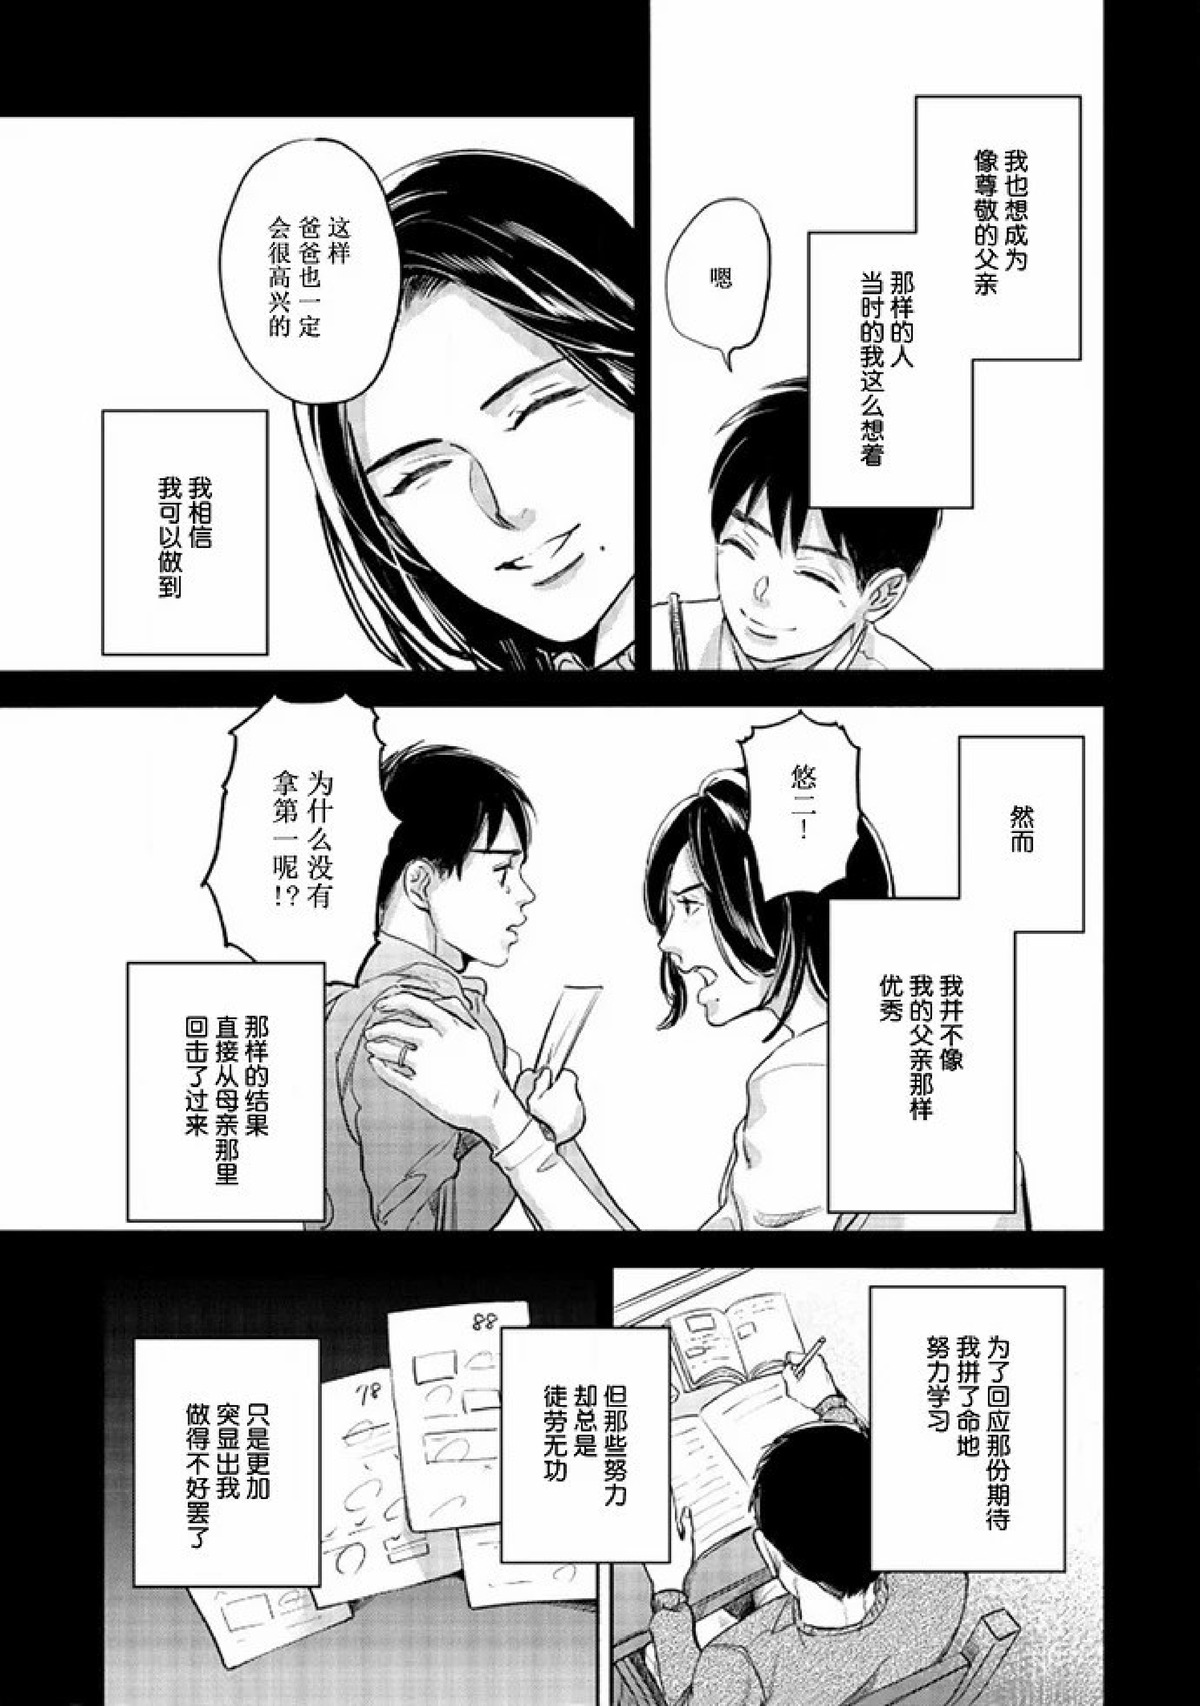 【Two sides of the same coin[耽美]】漫画-（上卷01-02）章节漫画下拉式图片-21.jpg